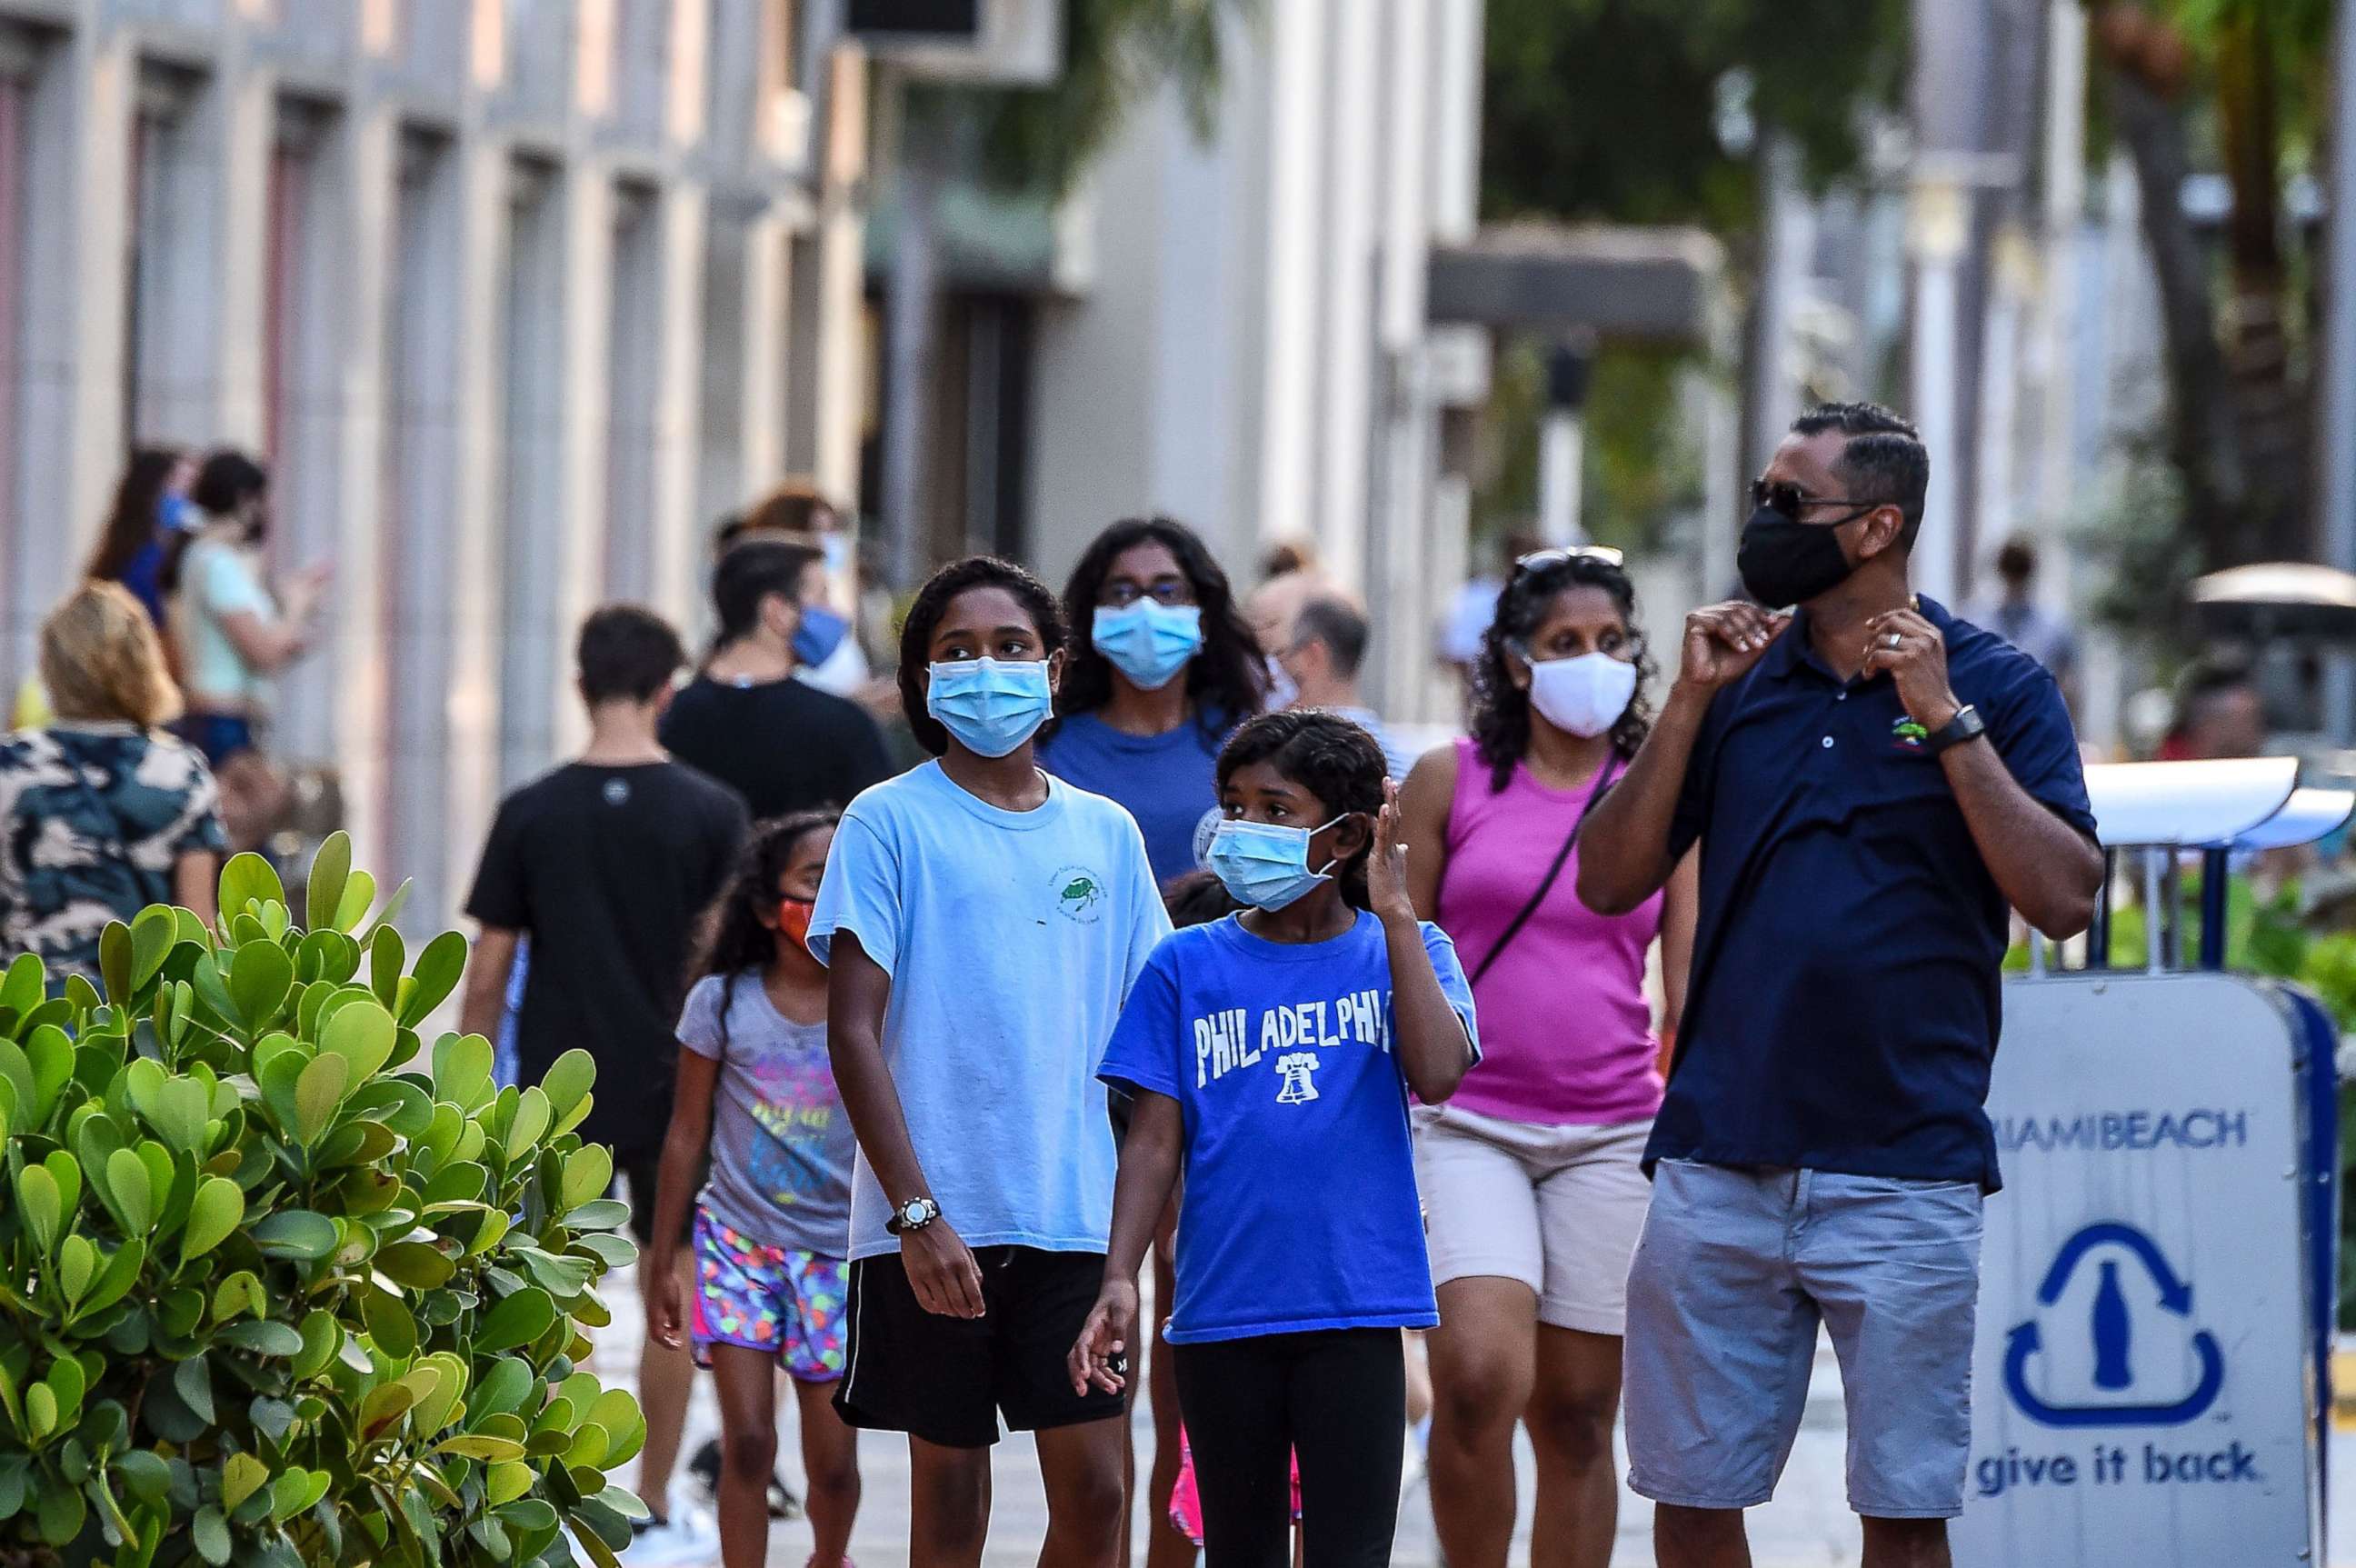 PHOTO: A family wearing facemasks walks at a shopping centre in Miami Beach, Fla., on June 29, 2020.